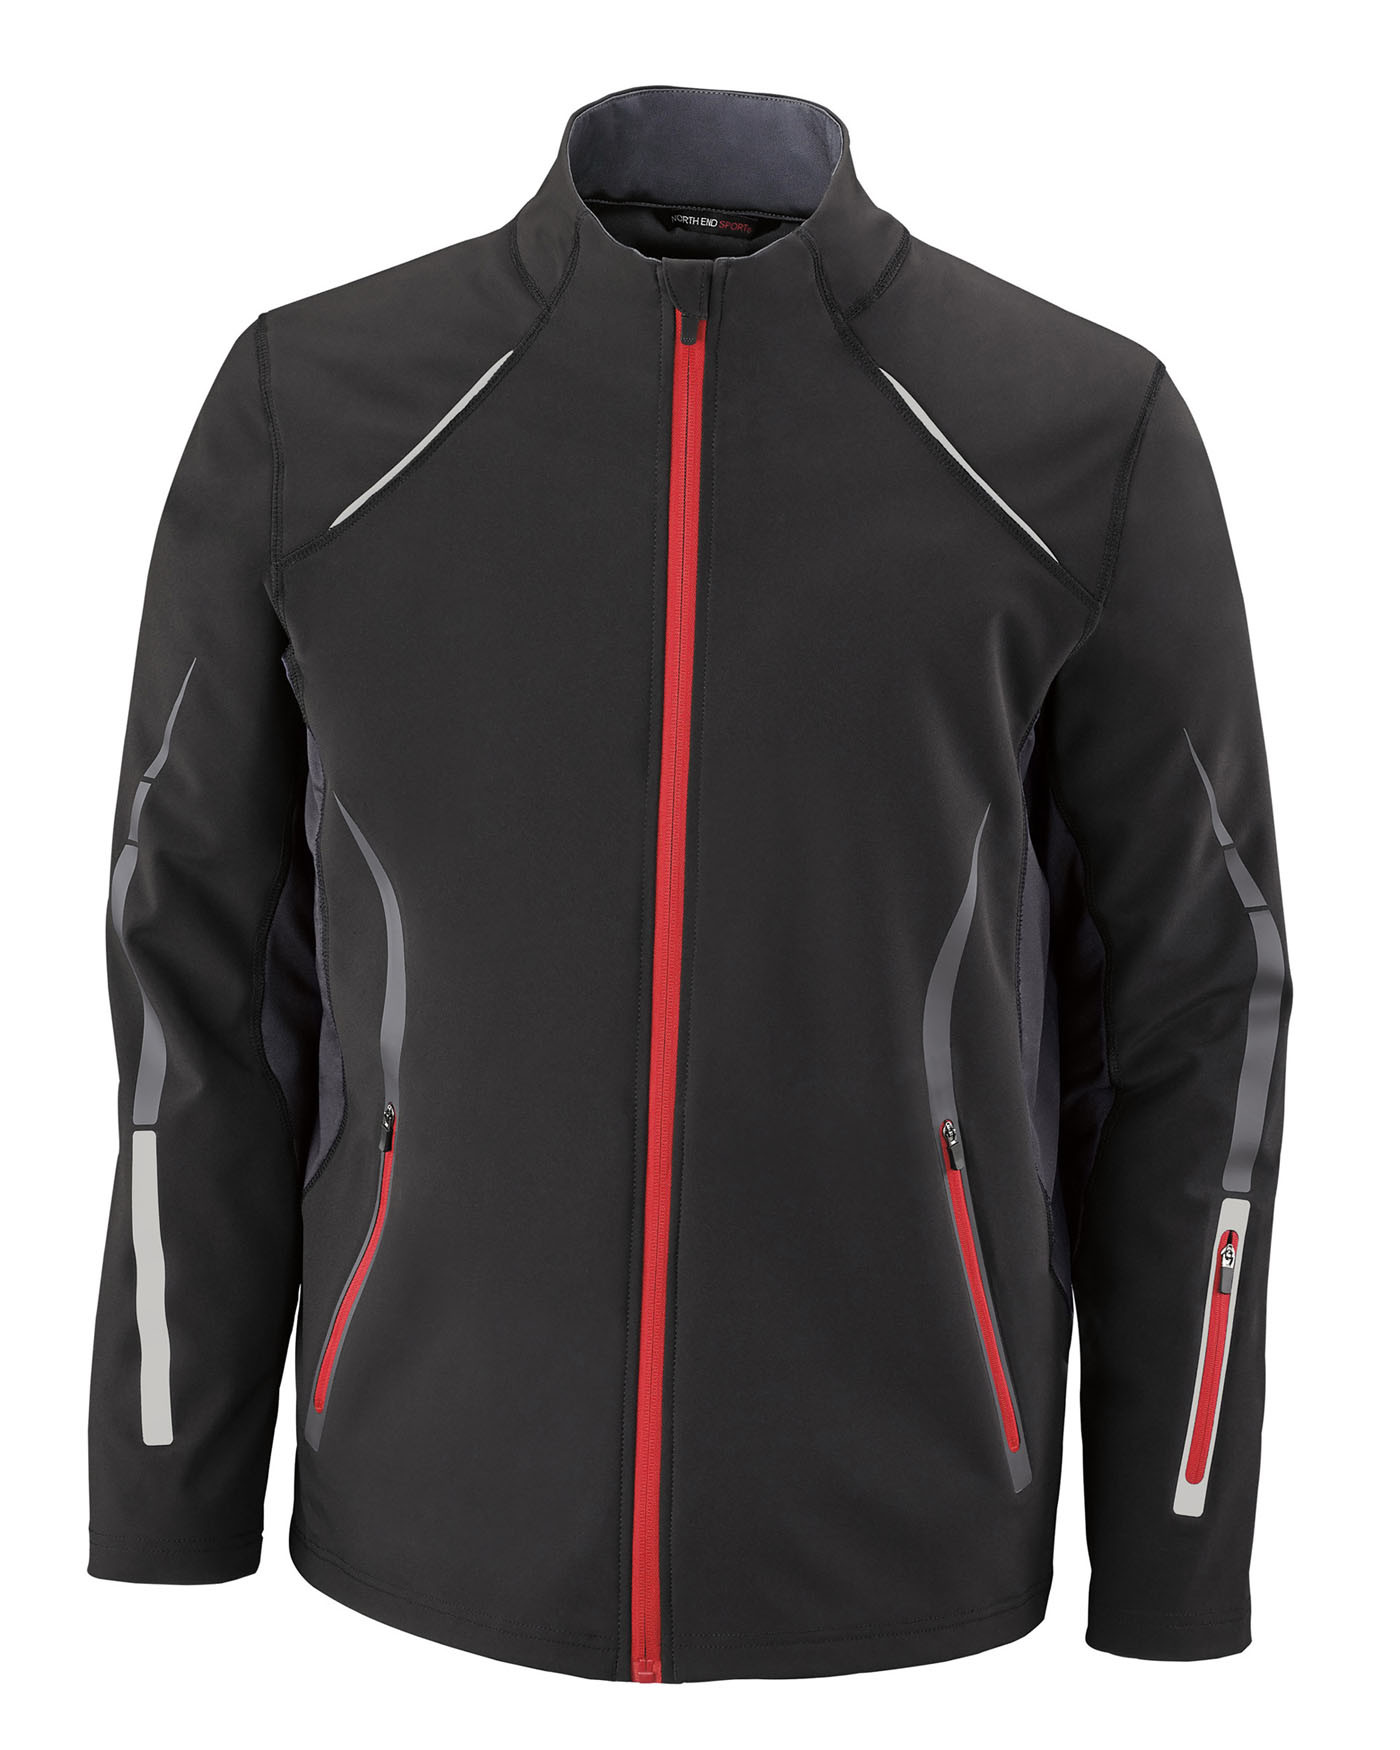 North End 88678 - Men's Pursuit 3-Layer Light Bonded Hybird Soft Shell Jacket With Laser Perforation